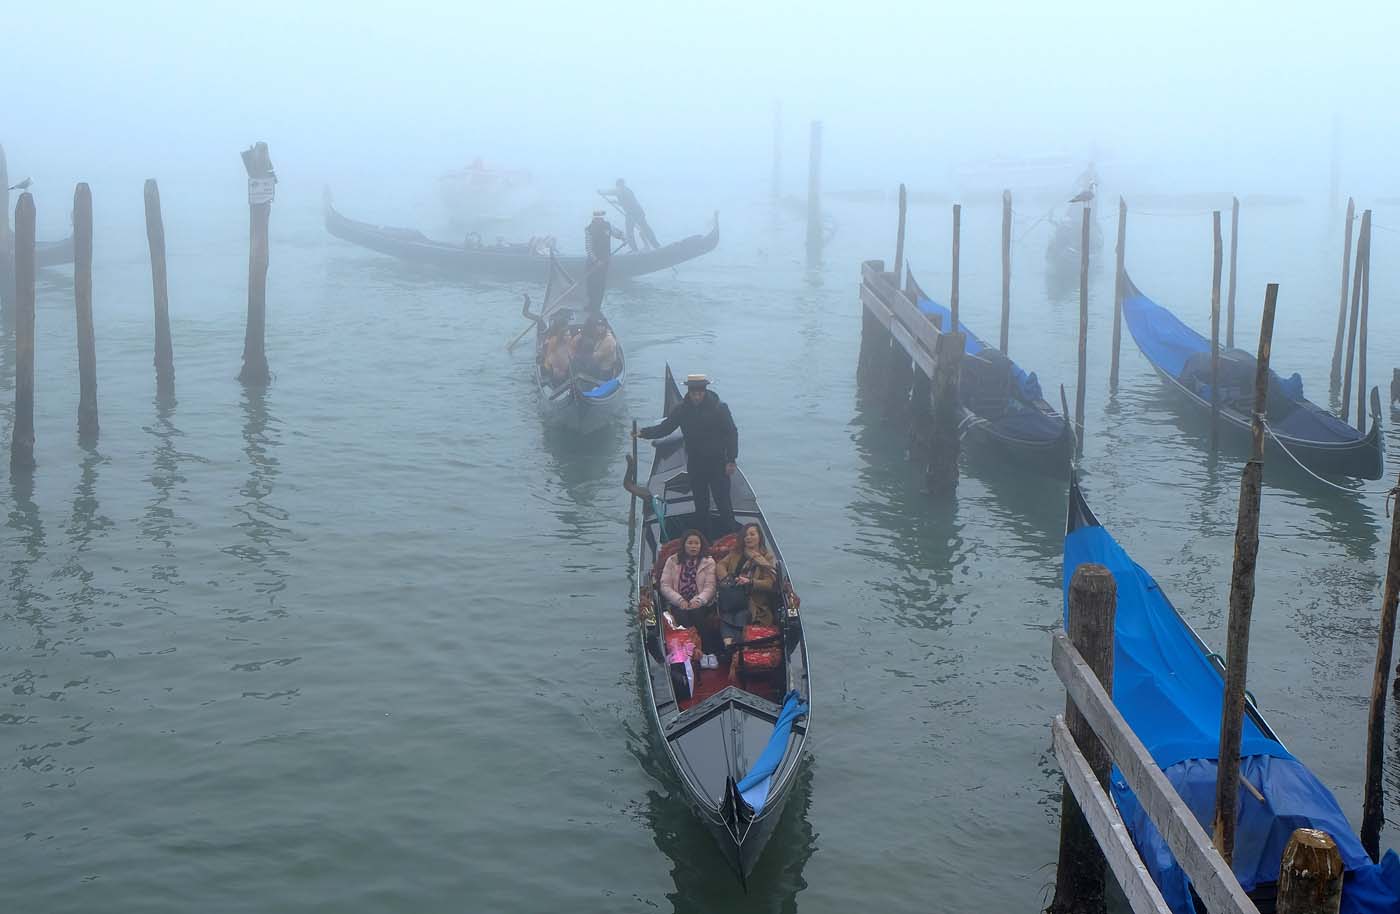 Gondoliers row in a canal near Saint Mark square in Venice, Italy January 28, 2018. REUTERS/Manuel Silvestri